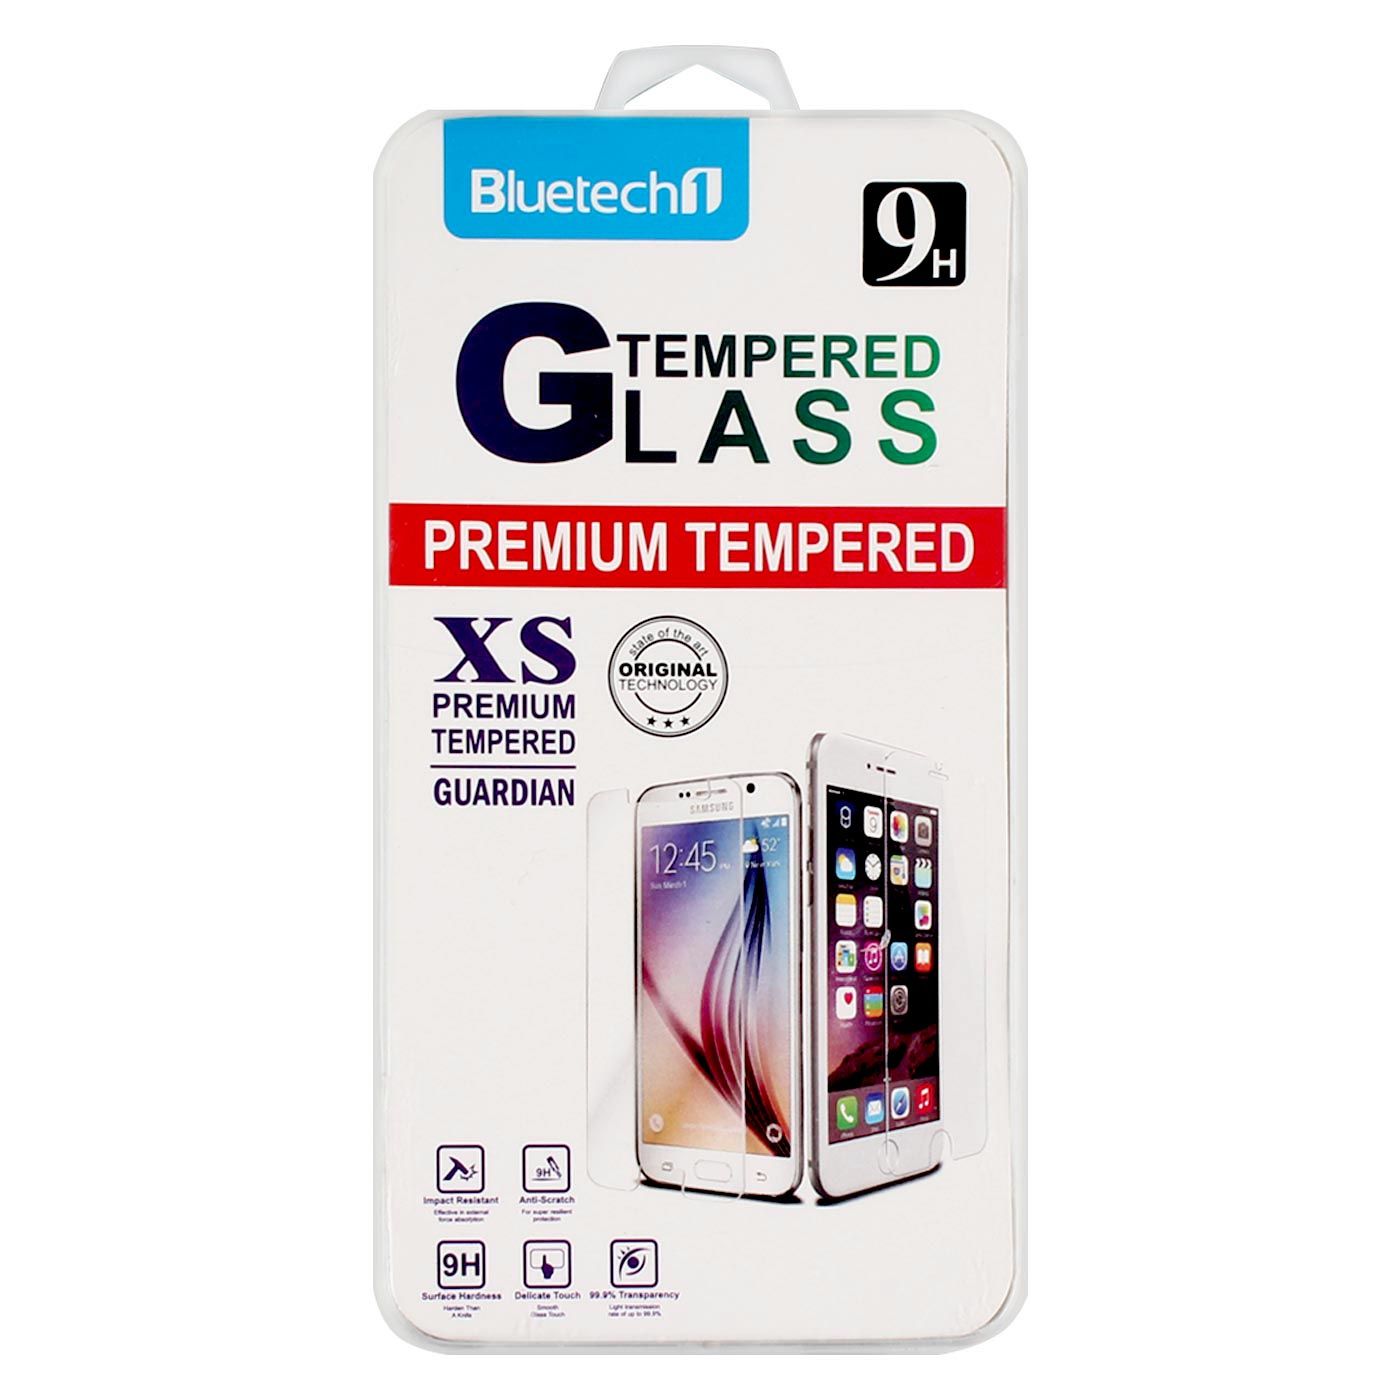 Bluetech Tempered Glass Iphone 4/4s - 1